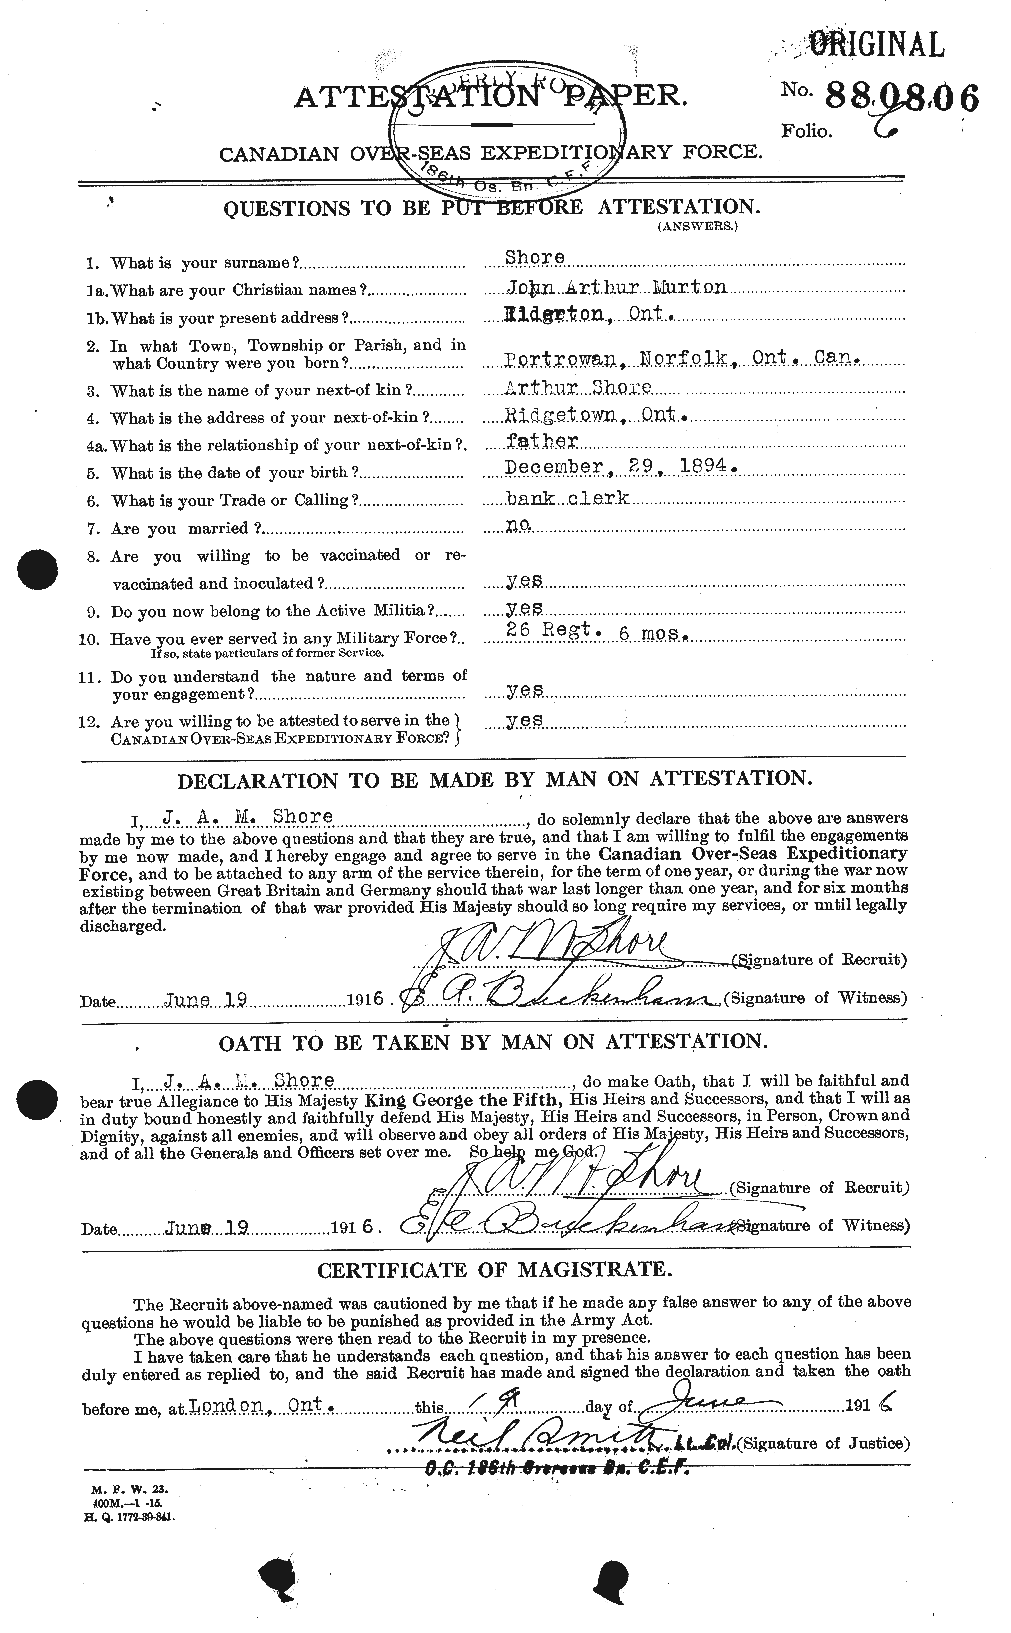 Personnel Records of the First World War - CEF 094286a